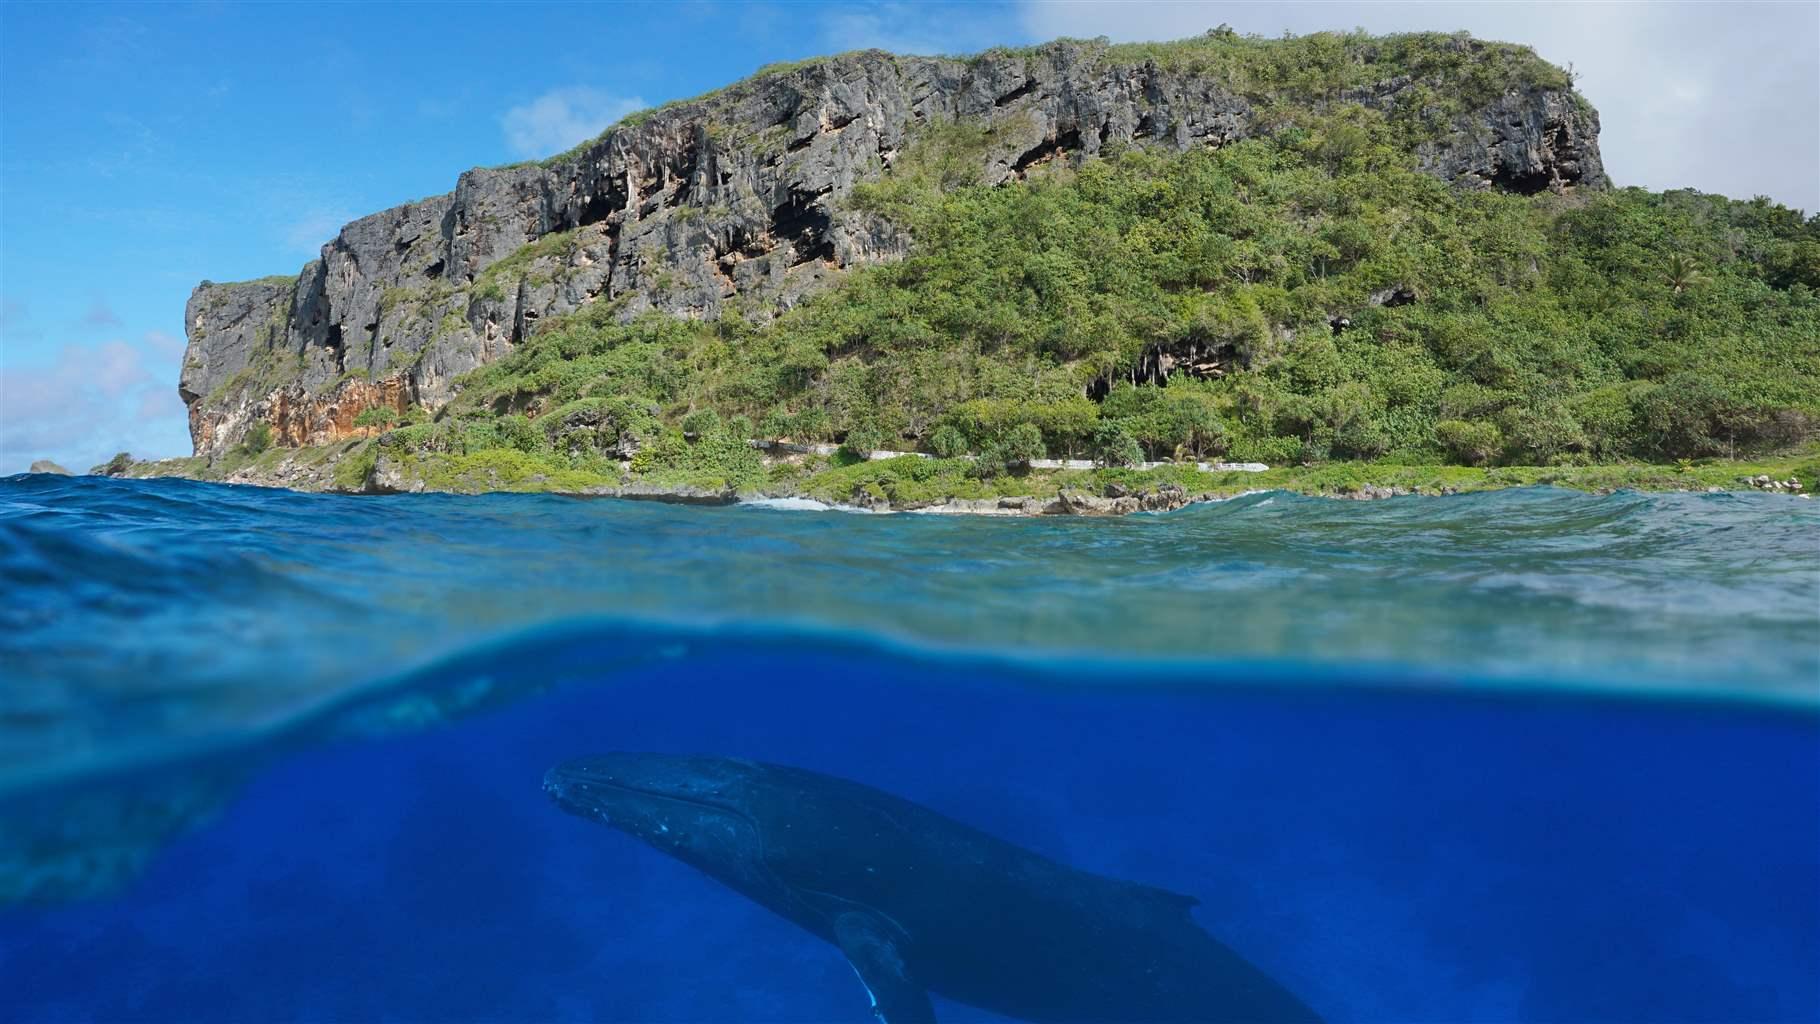 Split view above and below sea surface, coastal cliff with a humpback whale underwater, Pacific ocean, Rurutu island, Austral archipelago, French Polynesia